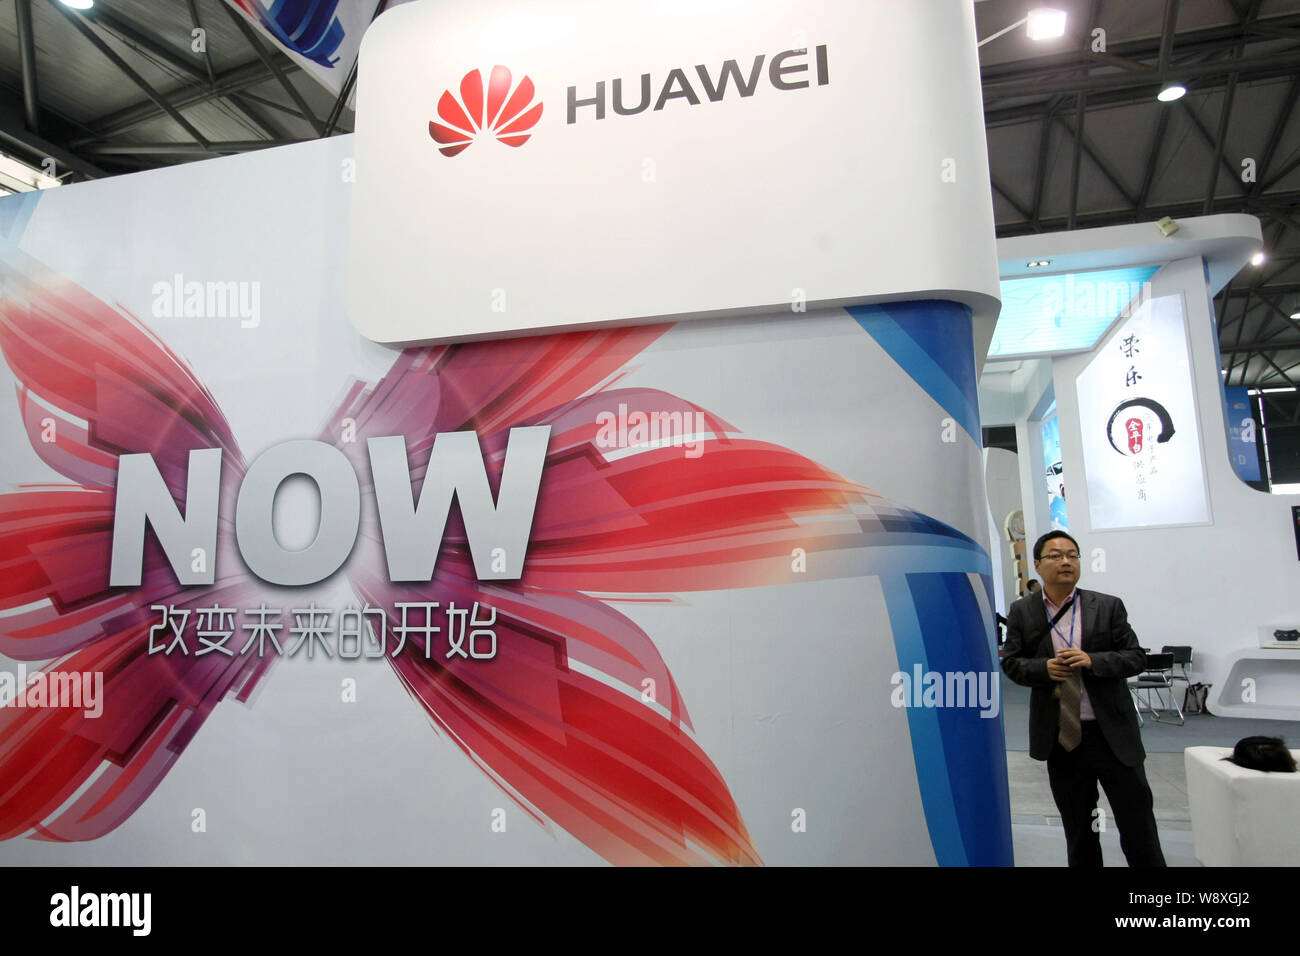 A man visits the stand of Huawei at an exhibition in Shanghai, China, 21 January 2014.   Facing new efforts by a hostile Obama administration to shut Stock Photo